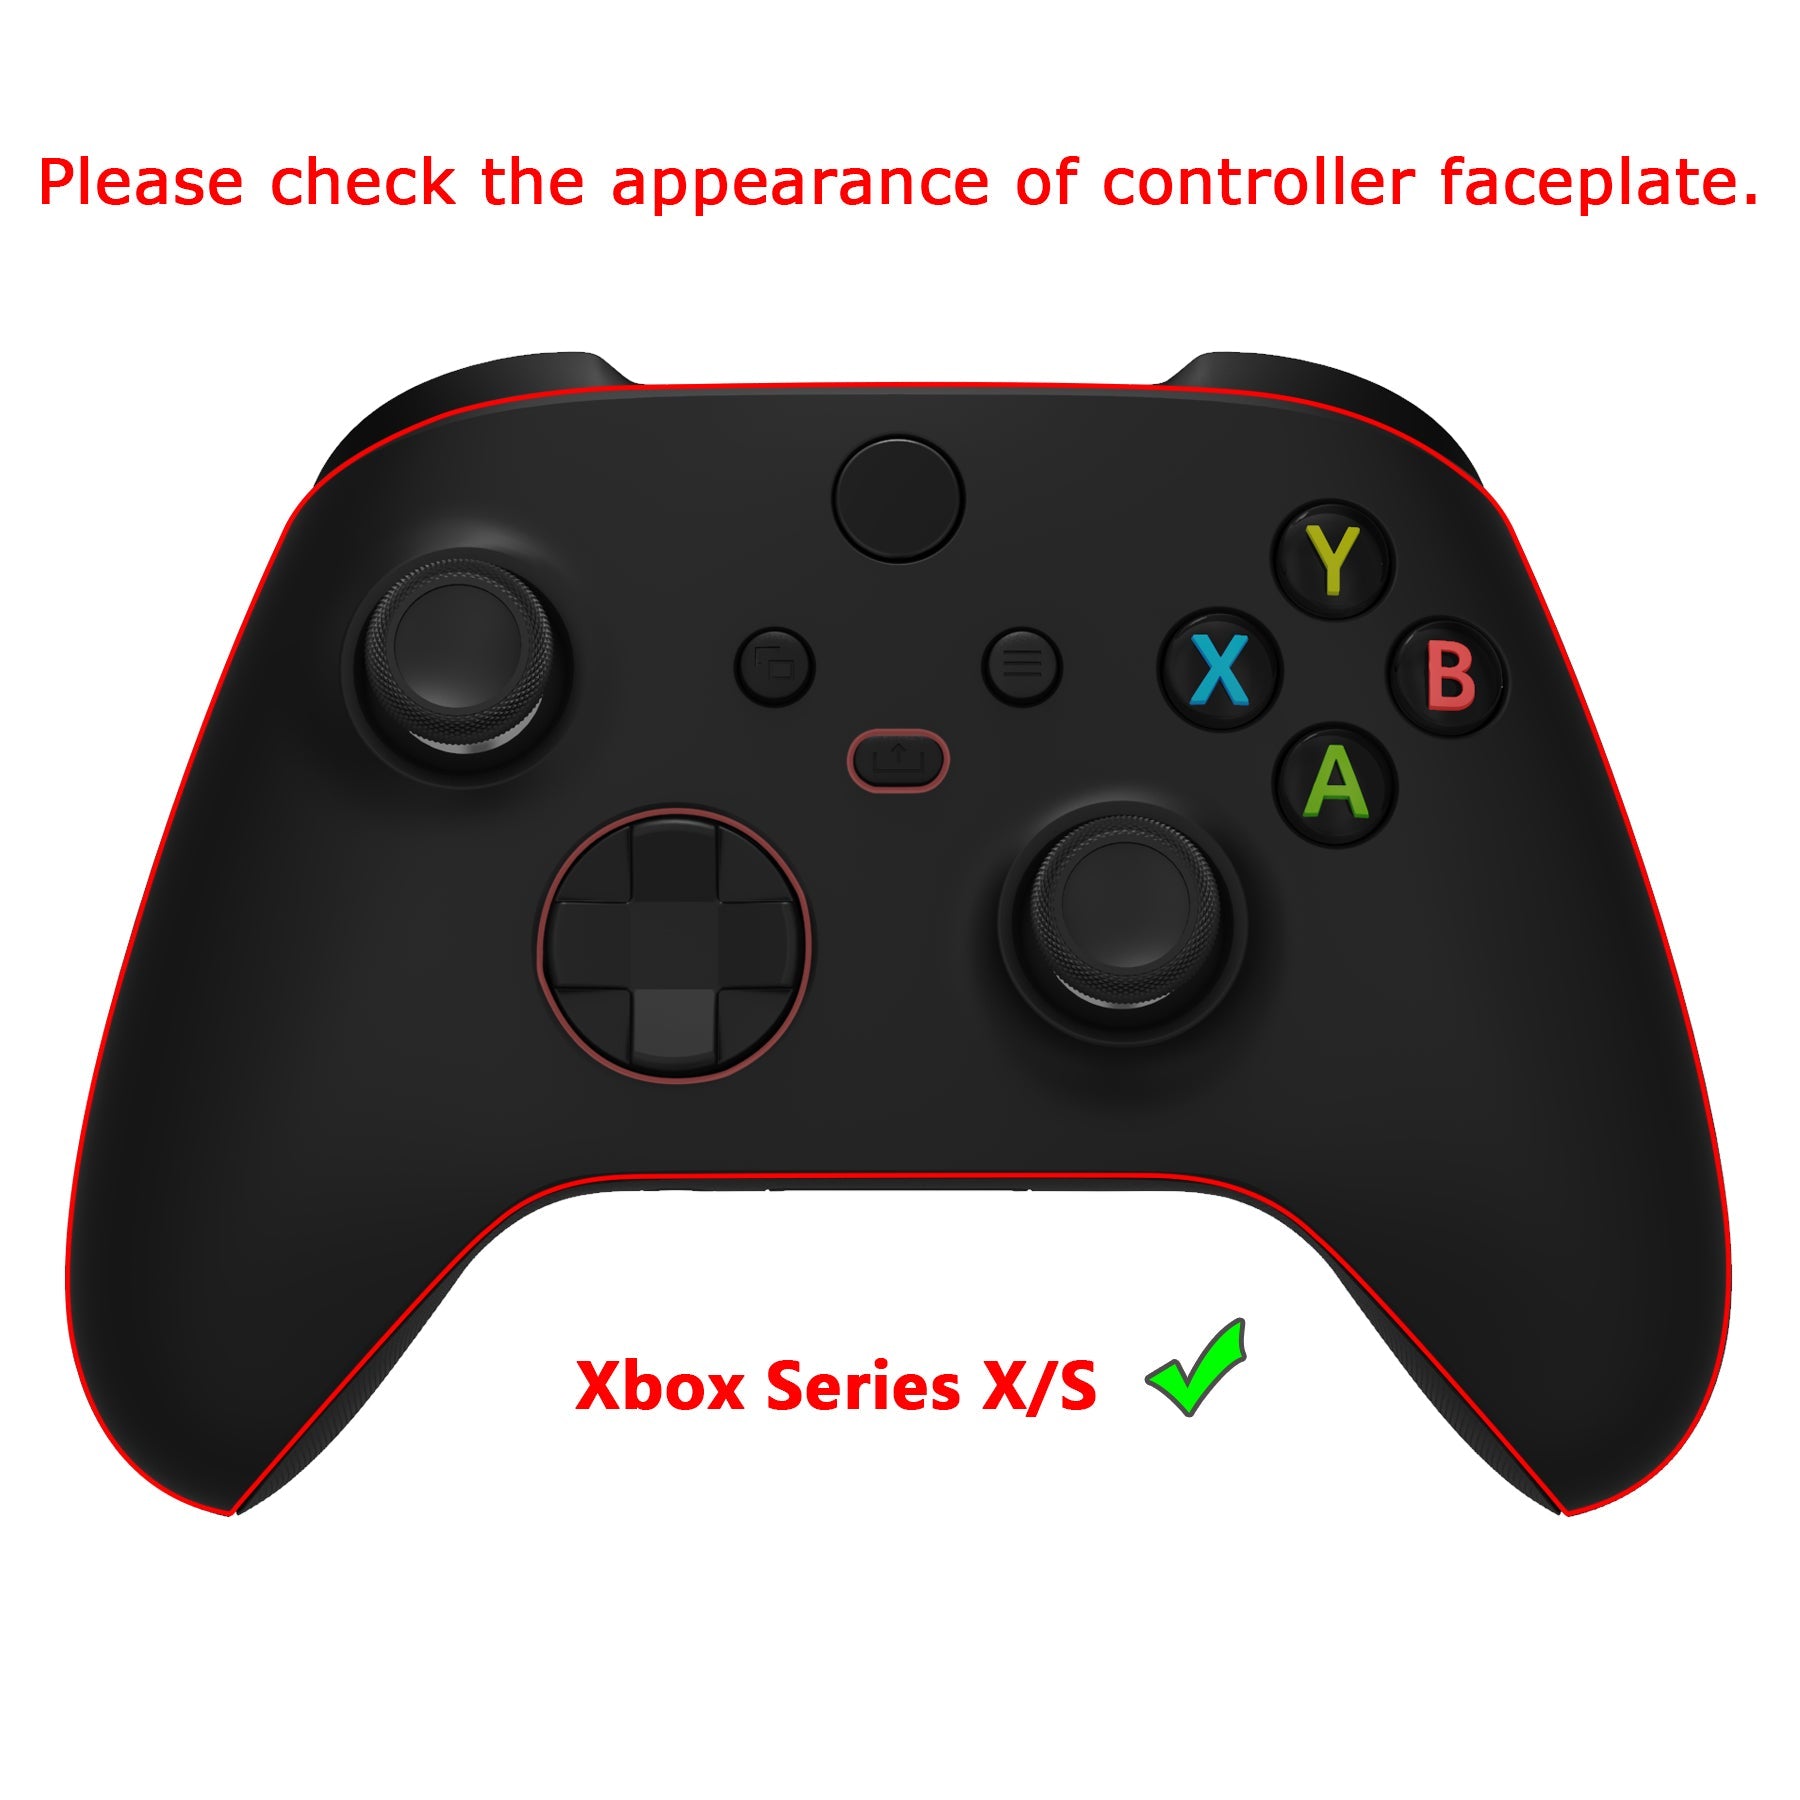 PlayVital Anti-Skid Sweat-Absorbent Controller Grip for Xbox Series X/S Controller, Professional Textured Soft Rubber Pads Handle Grips for Xbox Core Wireless Controller - View of Rising Sun - X3PJ033 PlayVital